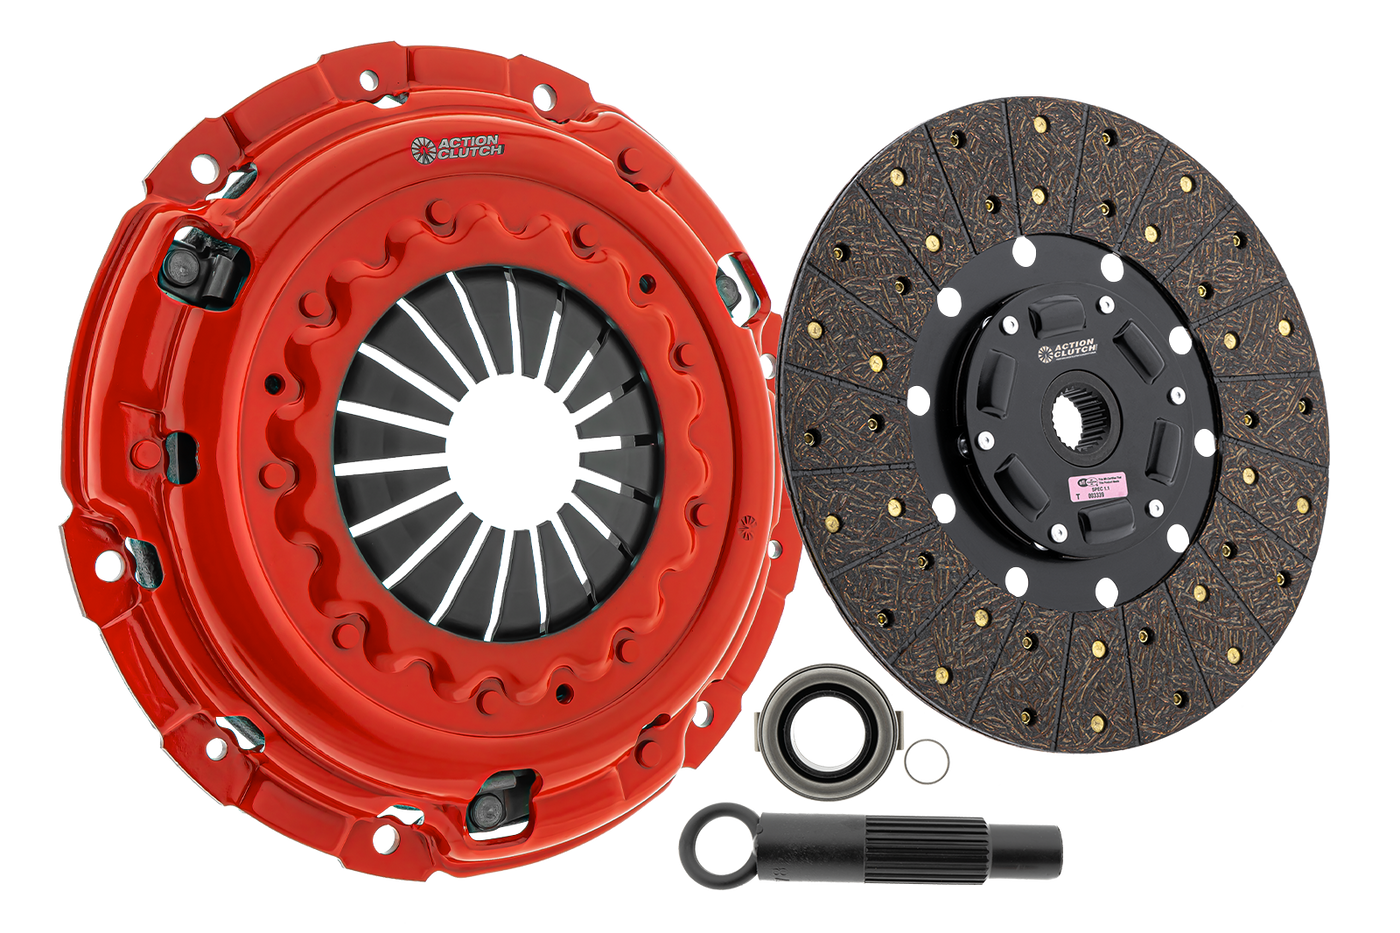 Stage 1 Clutch Kit (1OS) for Mitsubishi Eclipse 2000-2005 3.0L SOHC (6G72) Non-Turbo FWD